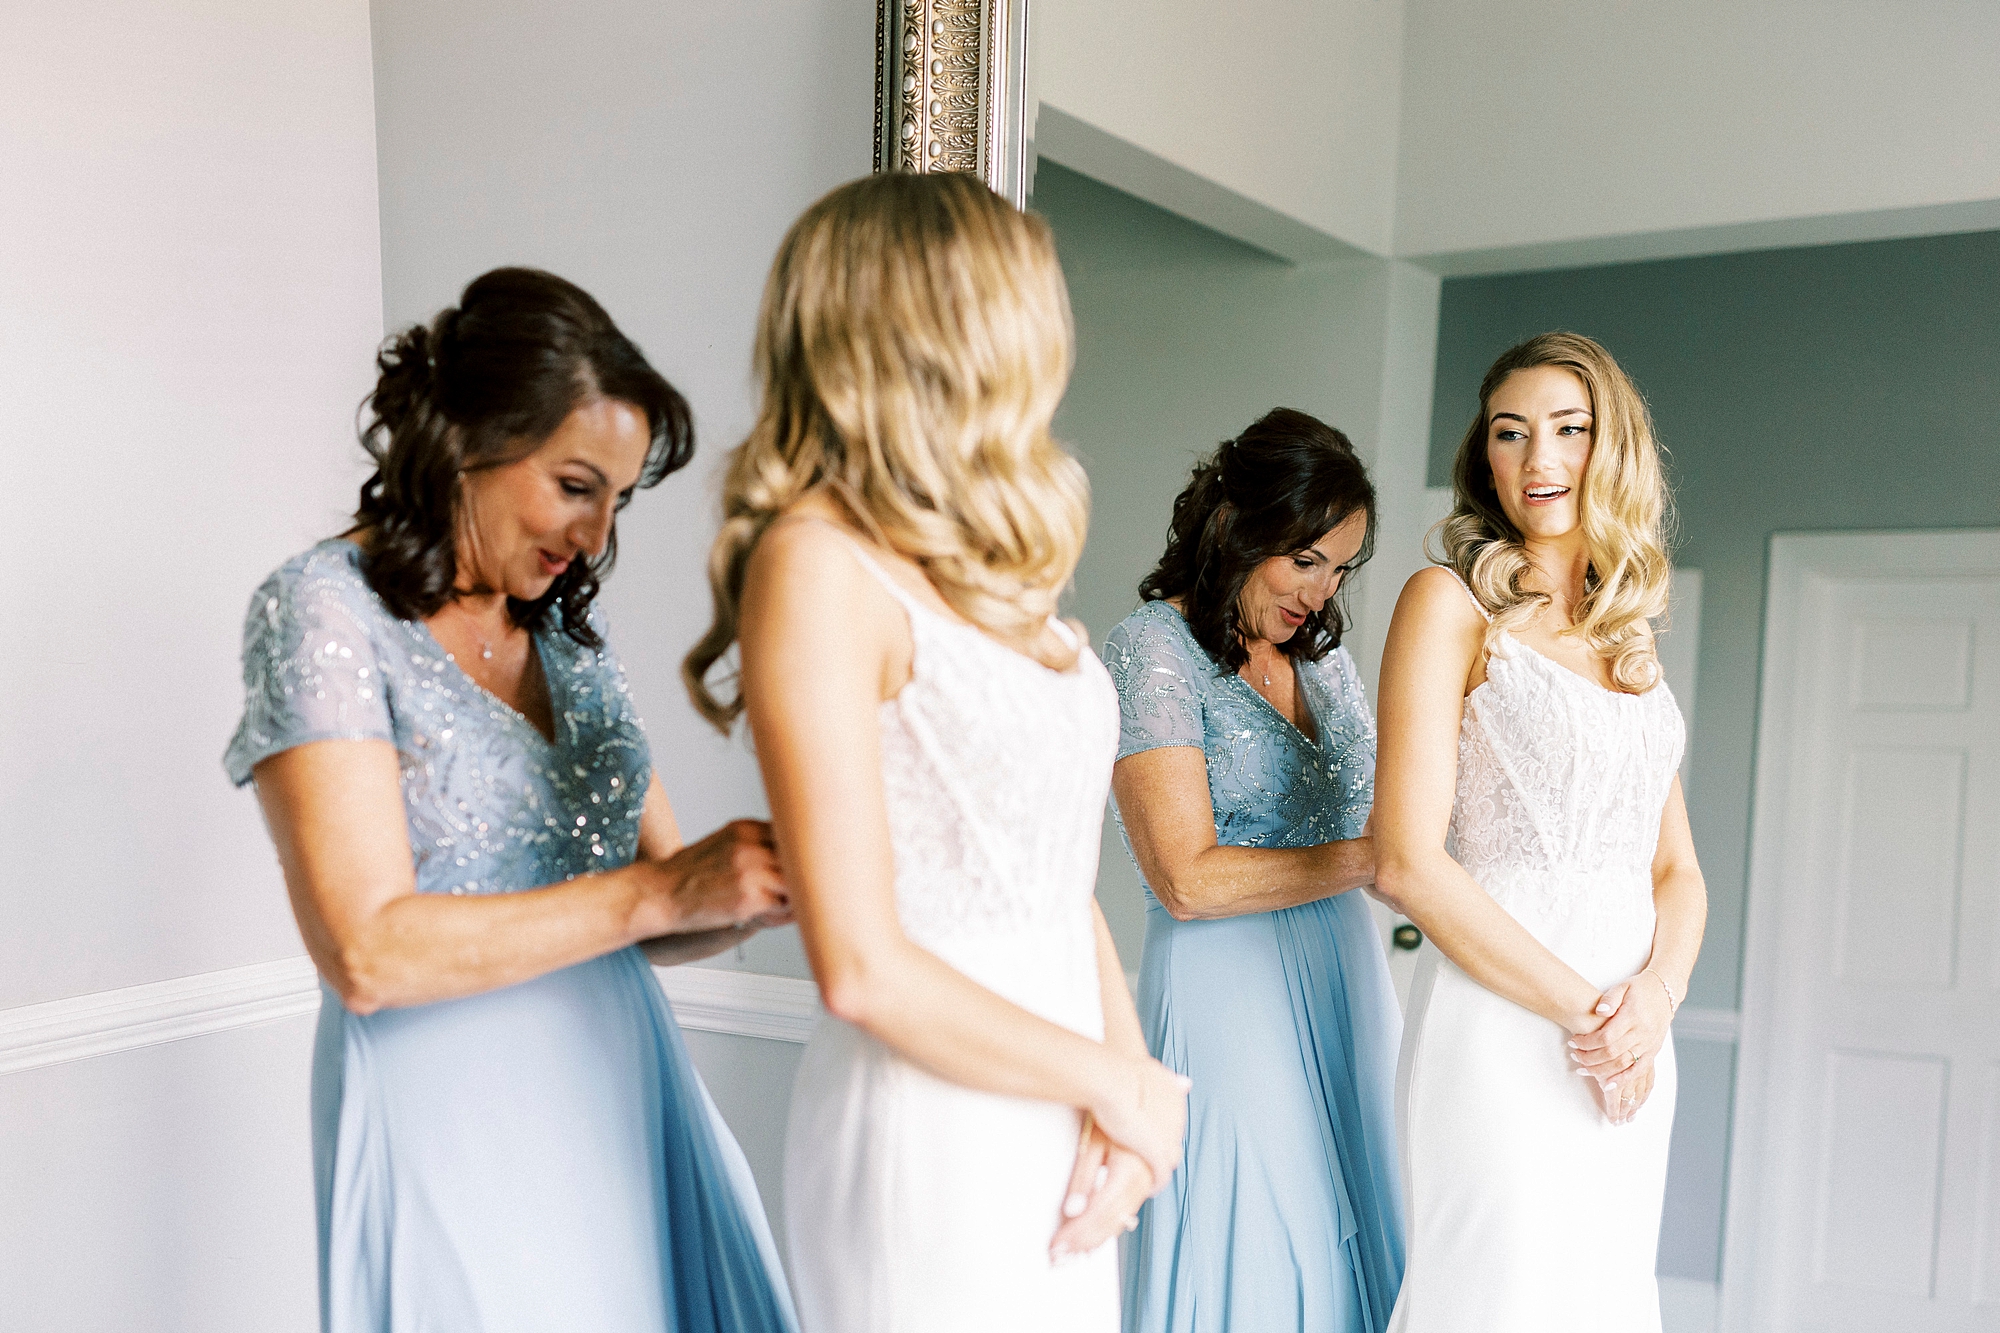 bridesmaid in light blue dress helps bride into wedding dress with reflection in mirror